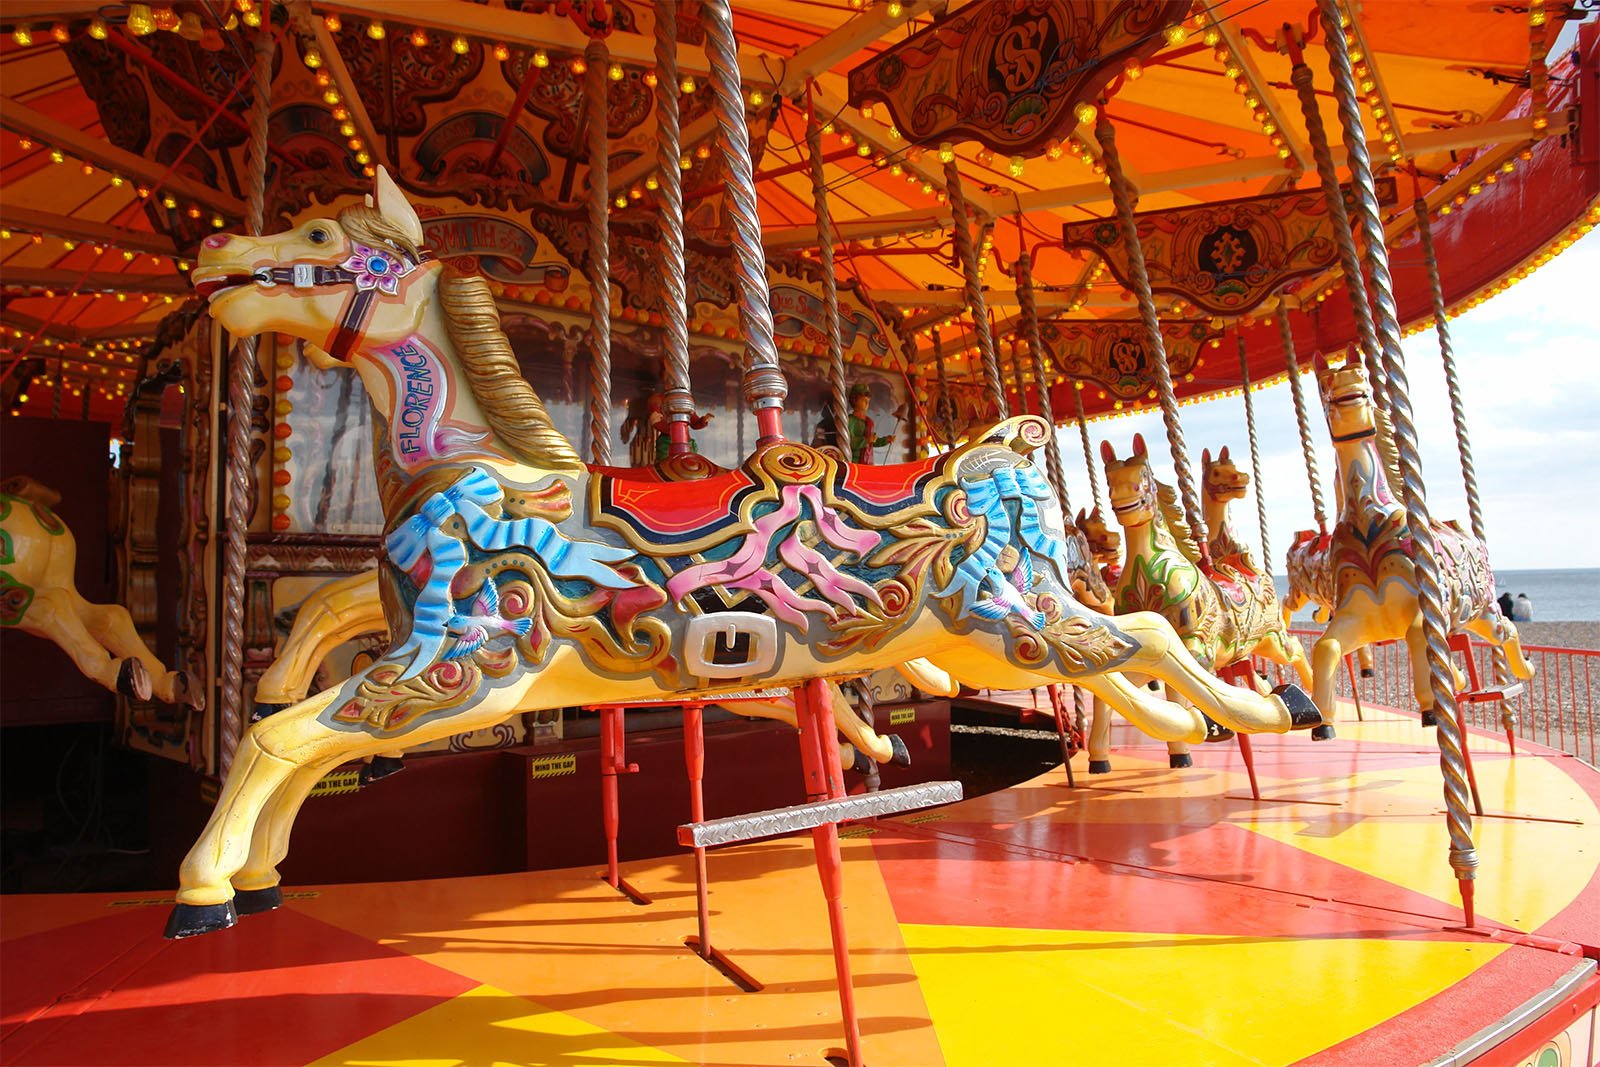 A colorful carousel with elaborate horses on a seaside boardwalk under a cloudy sky. the horses are painted in bright hues with intricate designs and the carousel is framed by red and gold decorations.